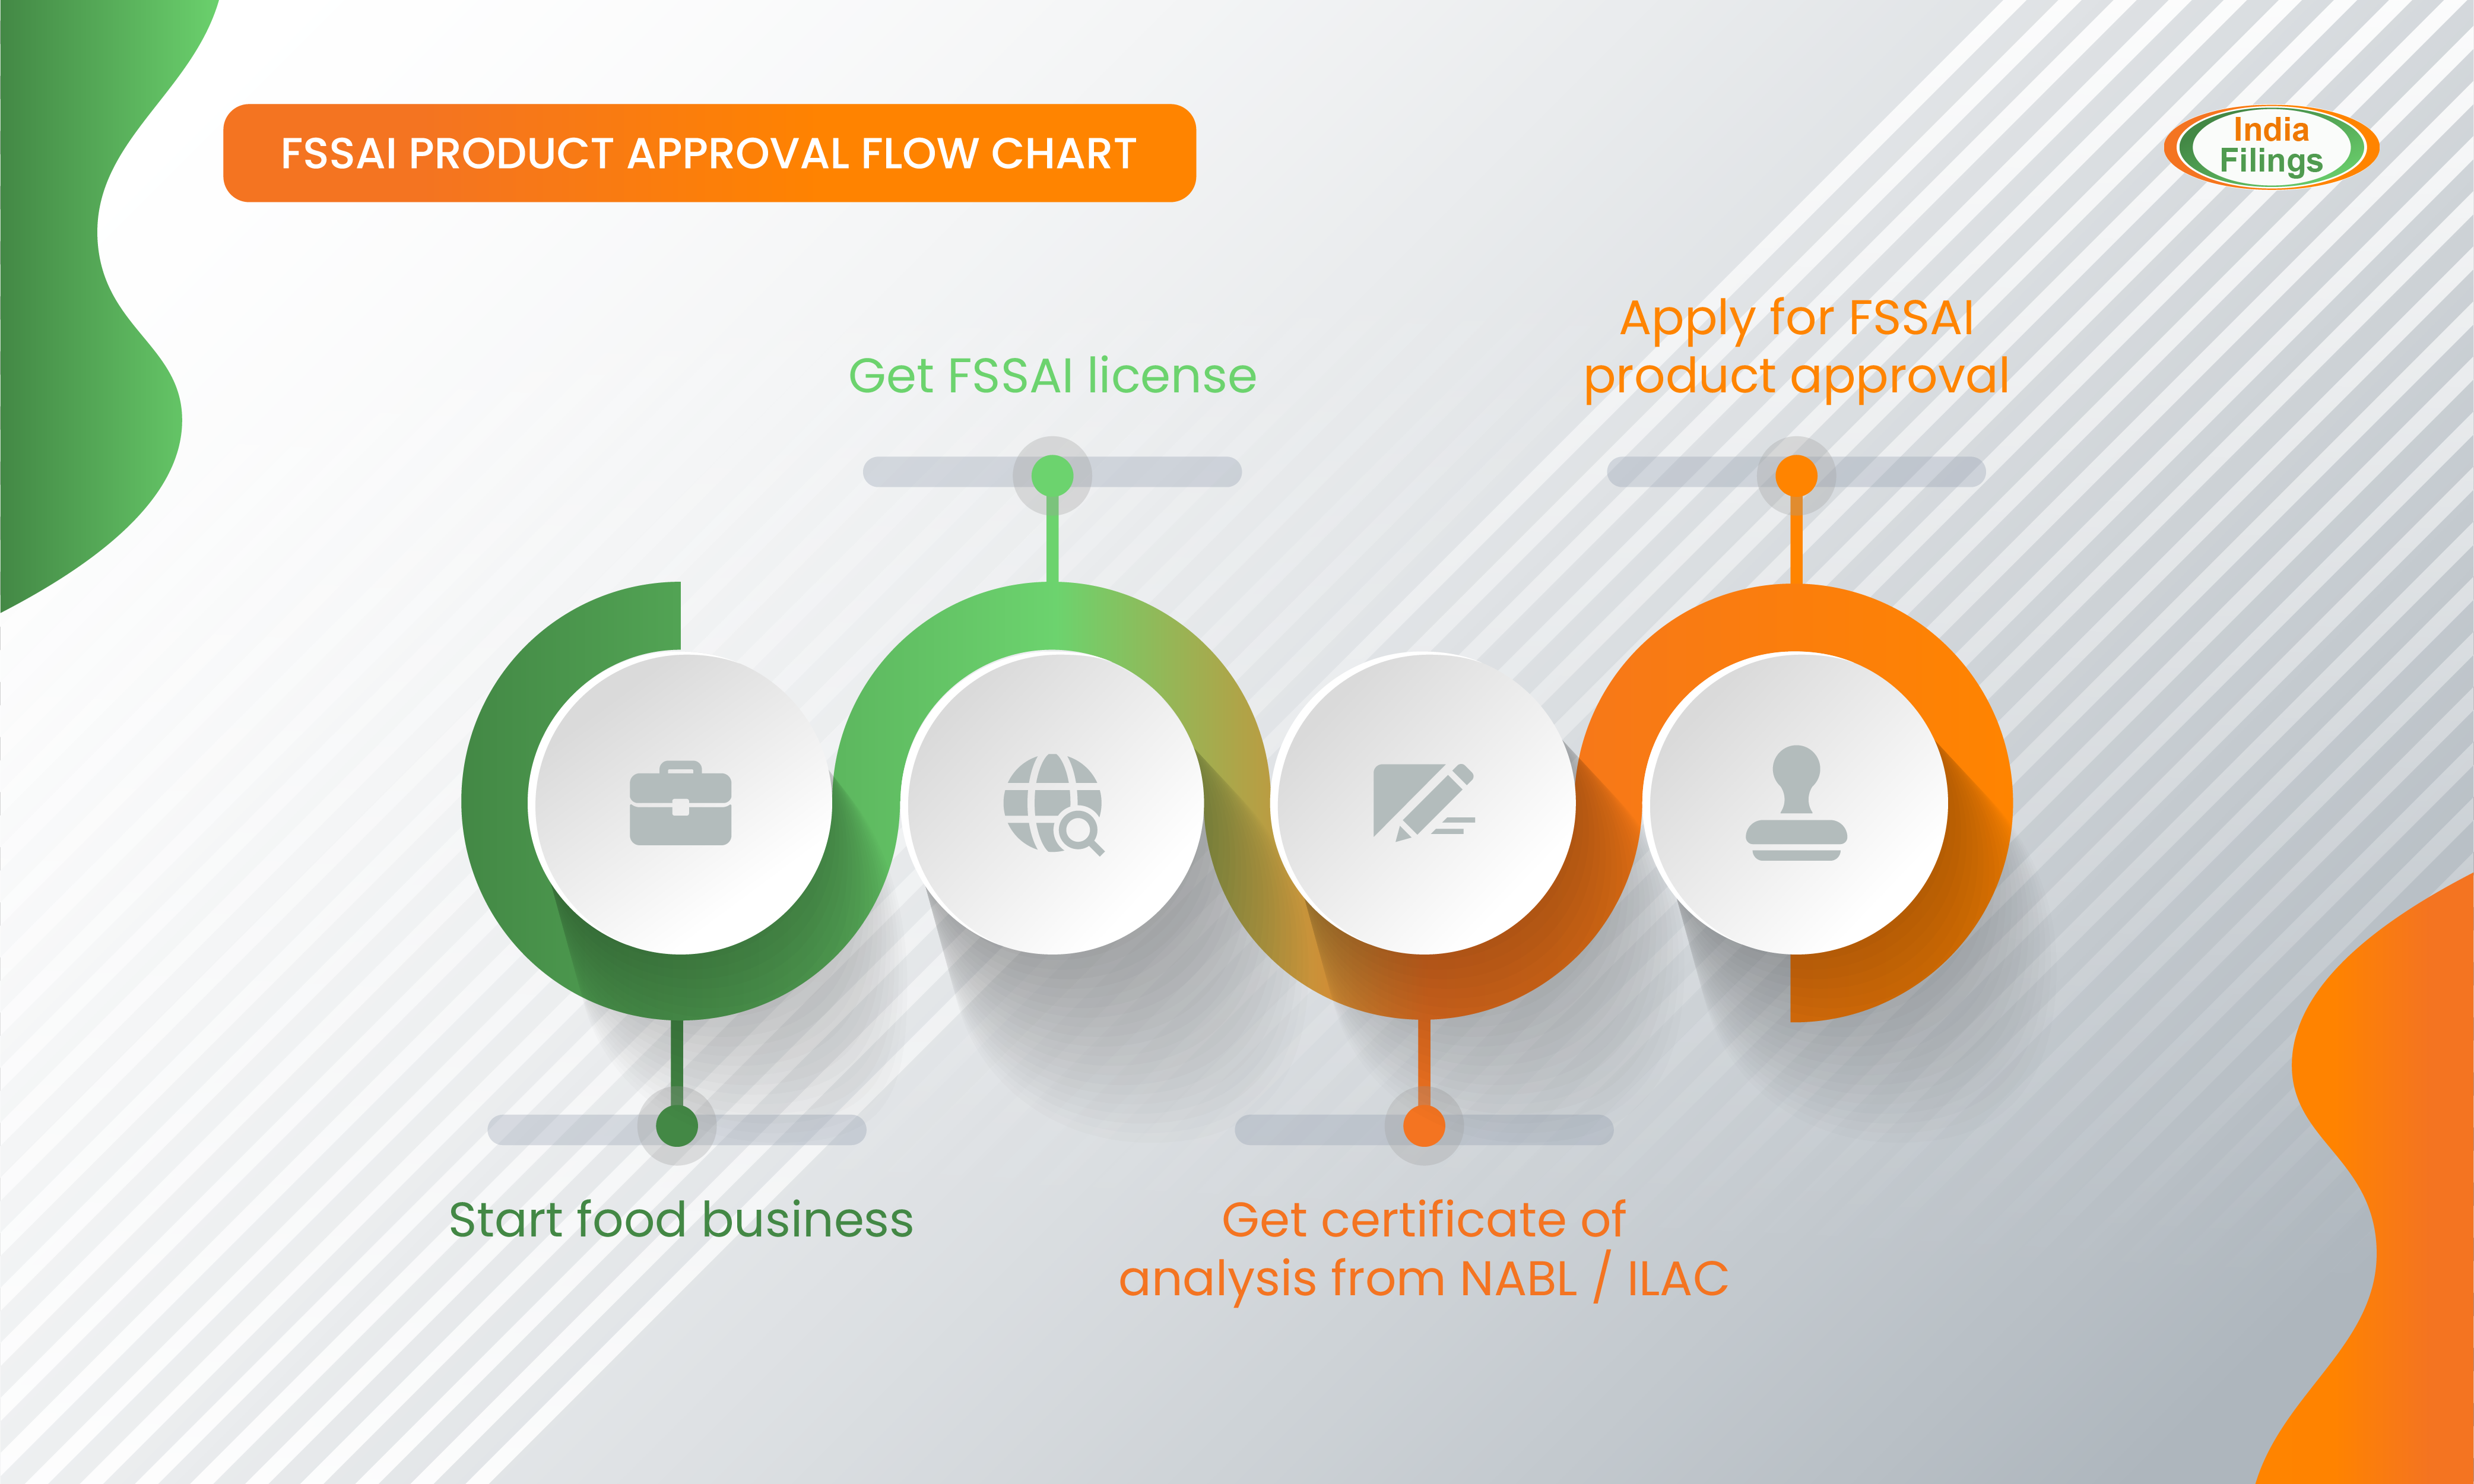 FSSAI Product Approval